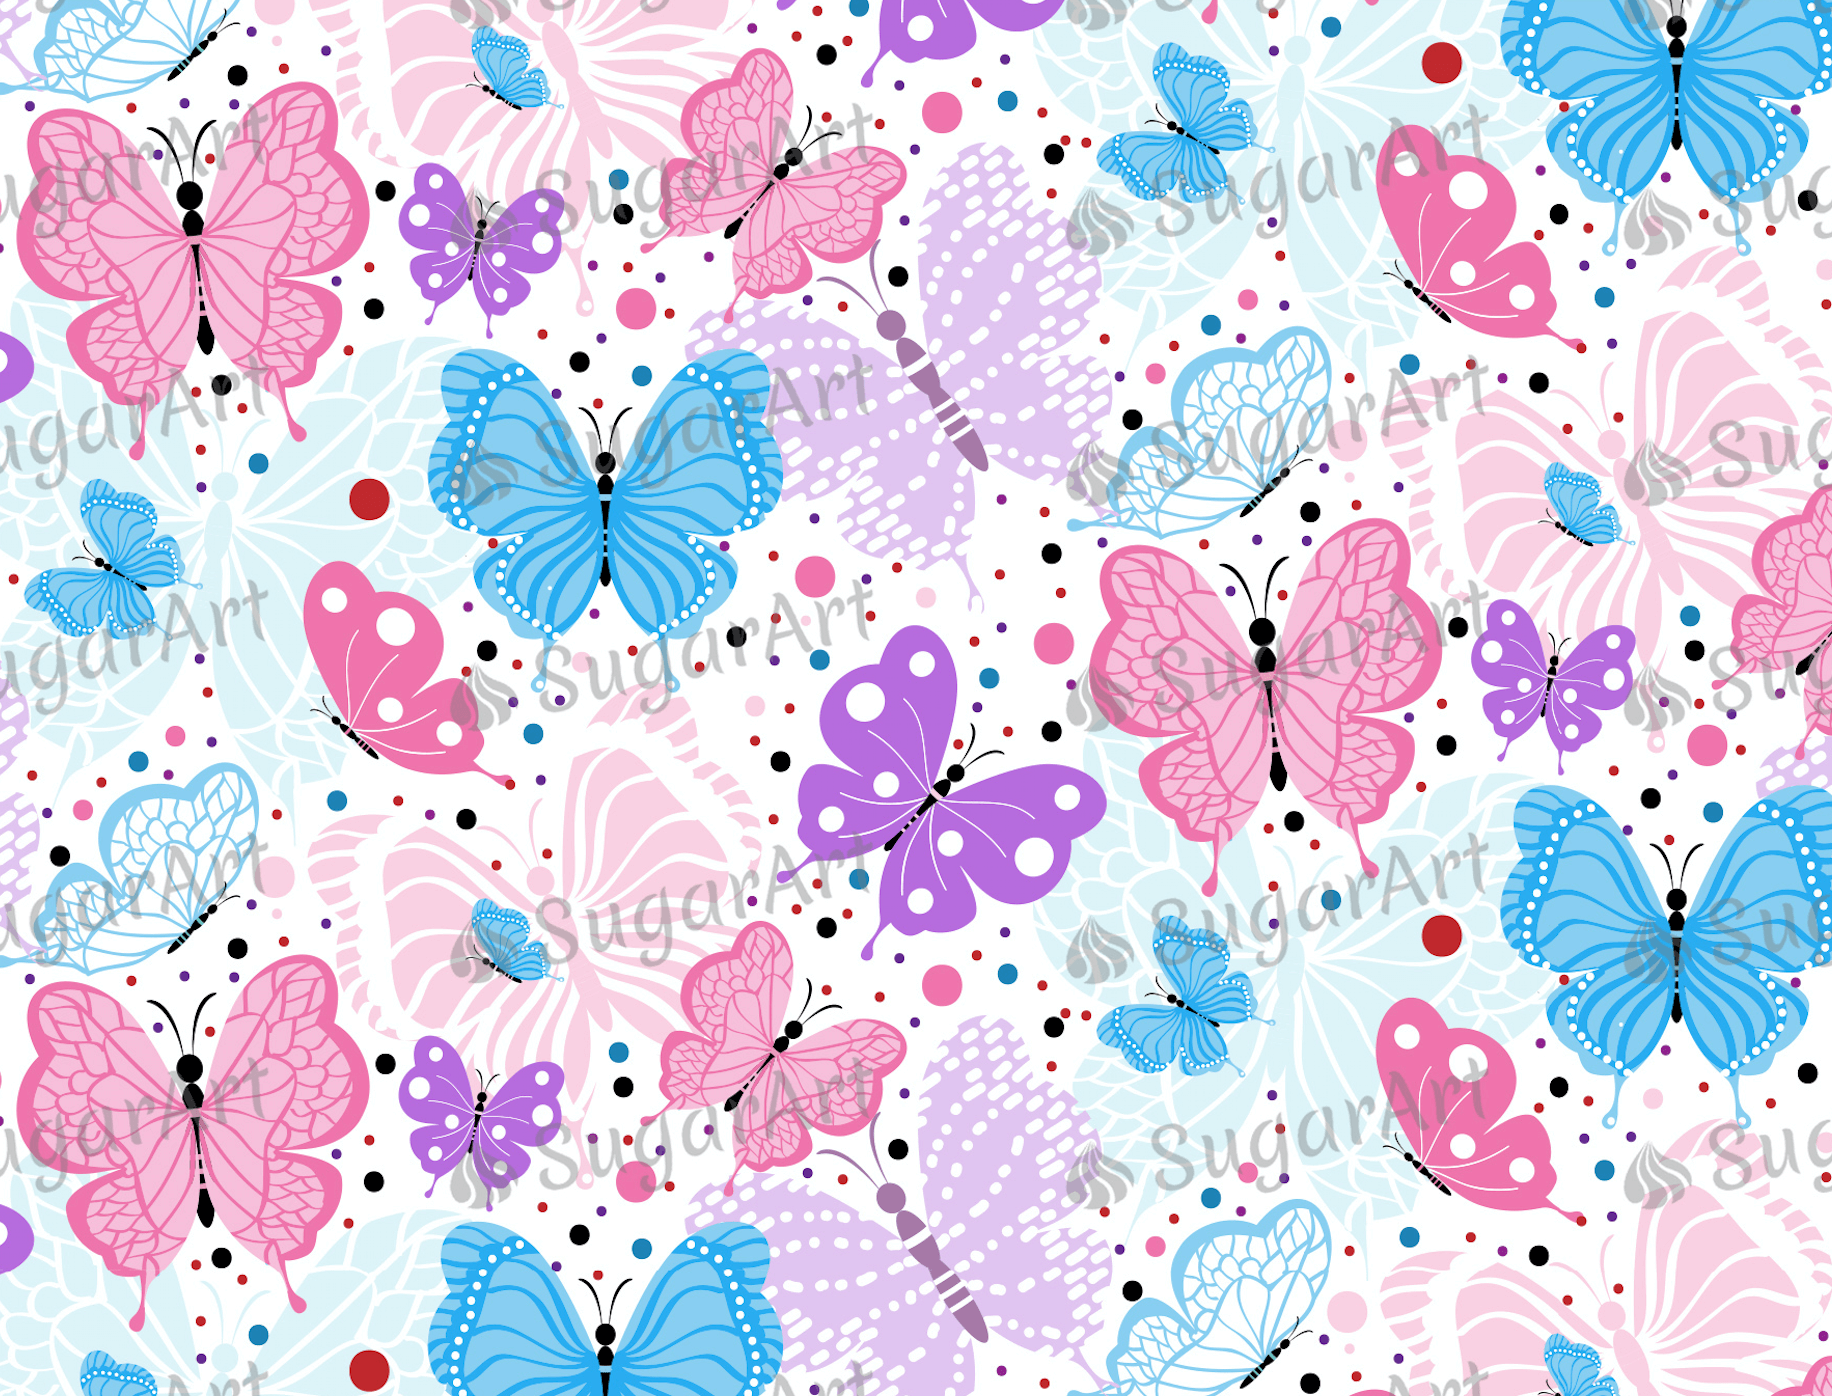 Flying Colorful Butterflies - Icing - ISA009.